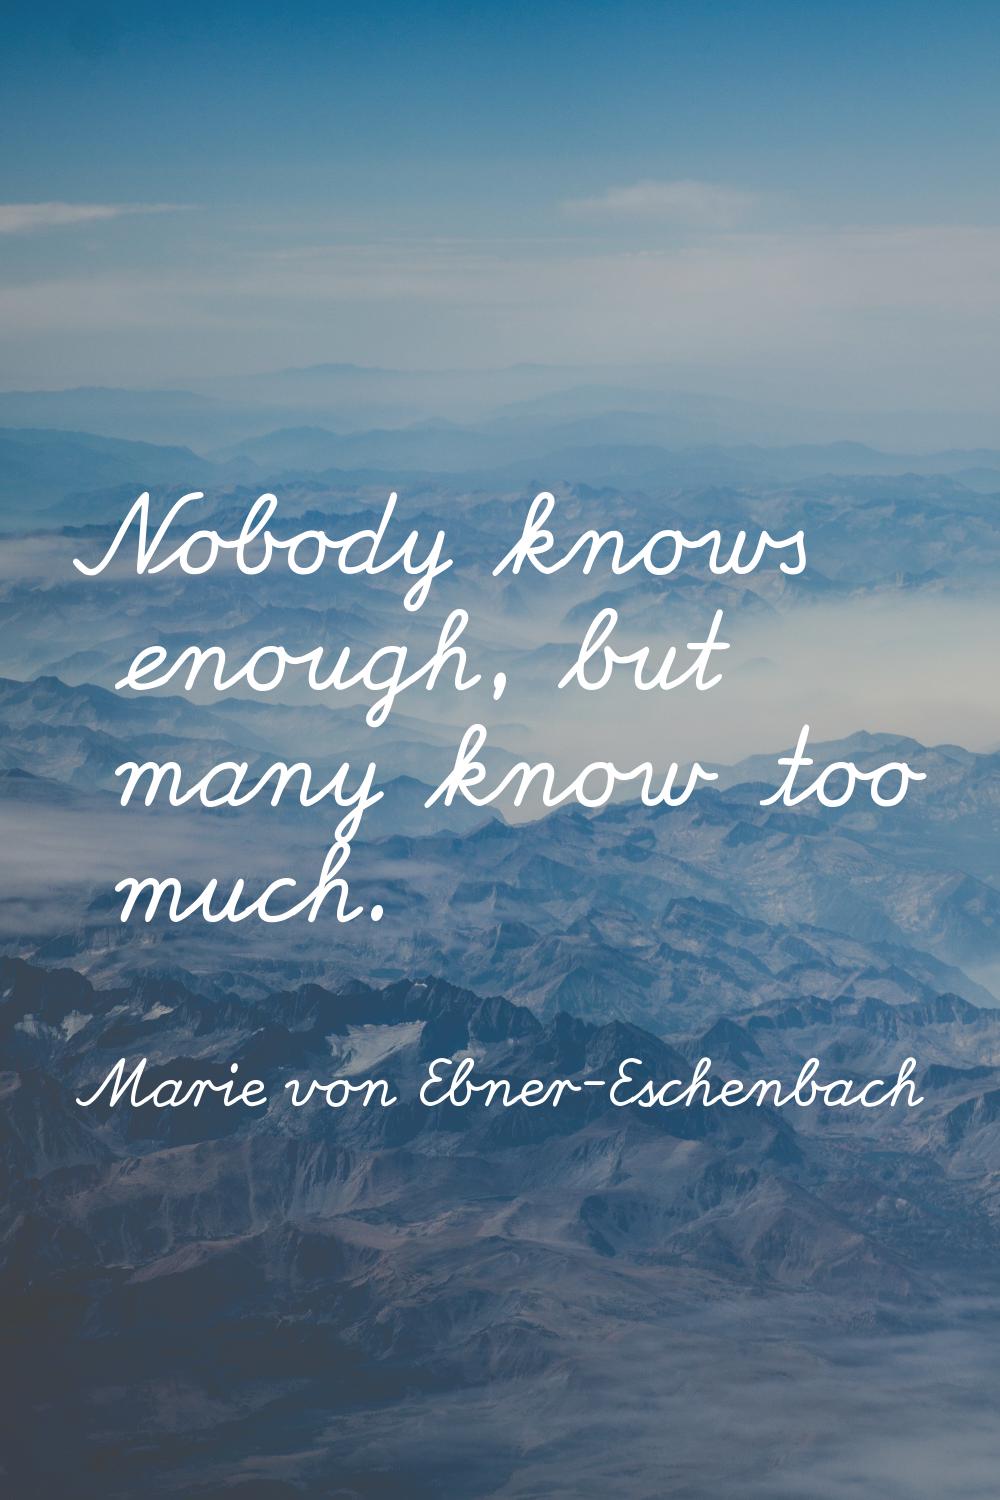 Nobody knows enough, but many know too much.